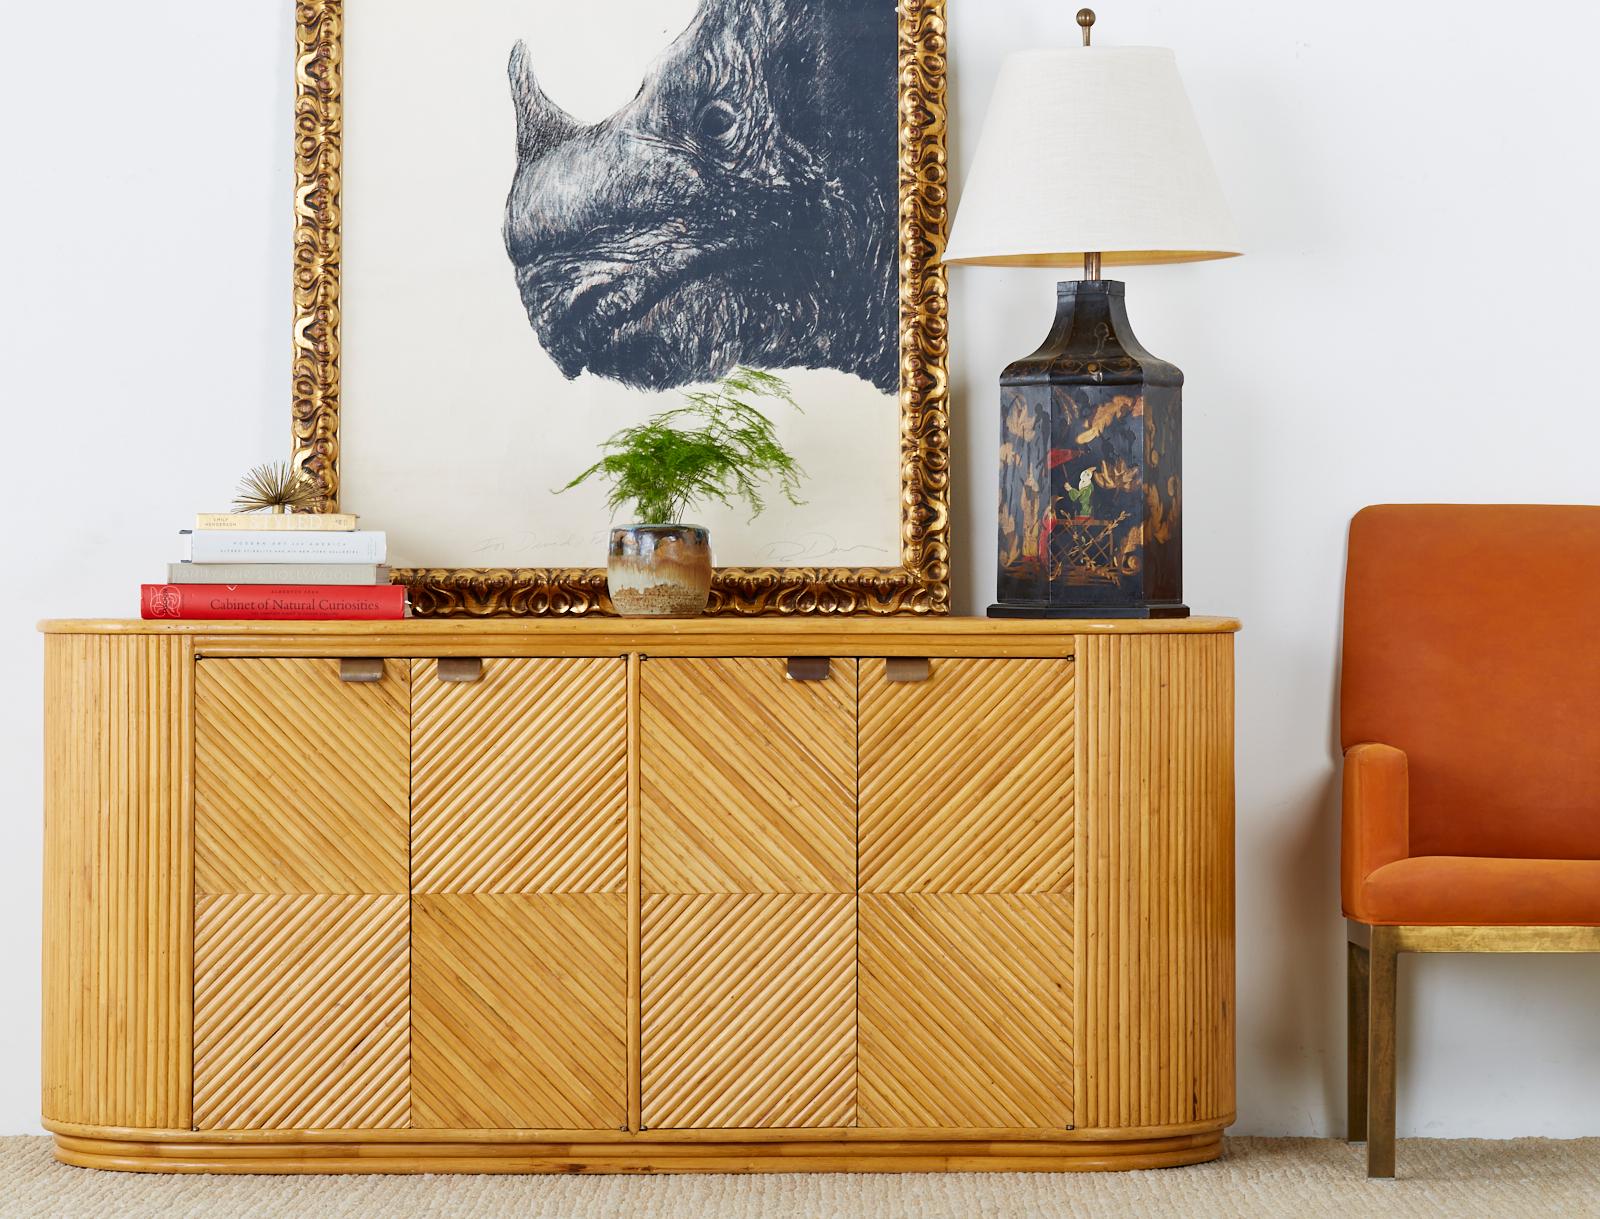 This sideboard server represents everything wonderful about the modern use of rattan. Incredible geometric patterns abound reminiscent of Art deco with modern shapes and lines. While touching modernism the rattan shape keeps the piece grounded in